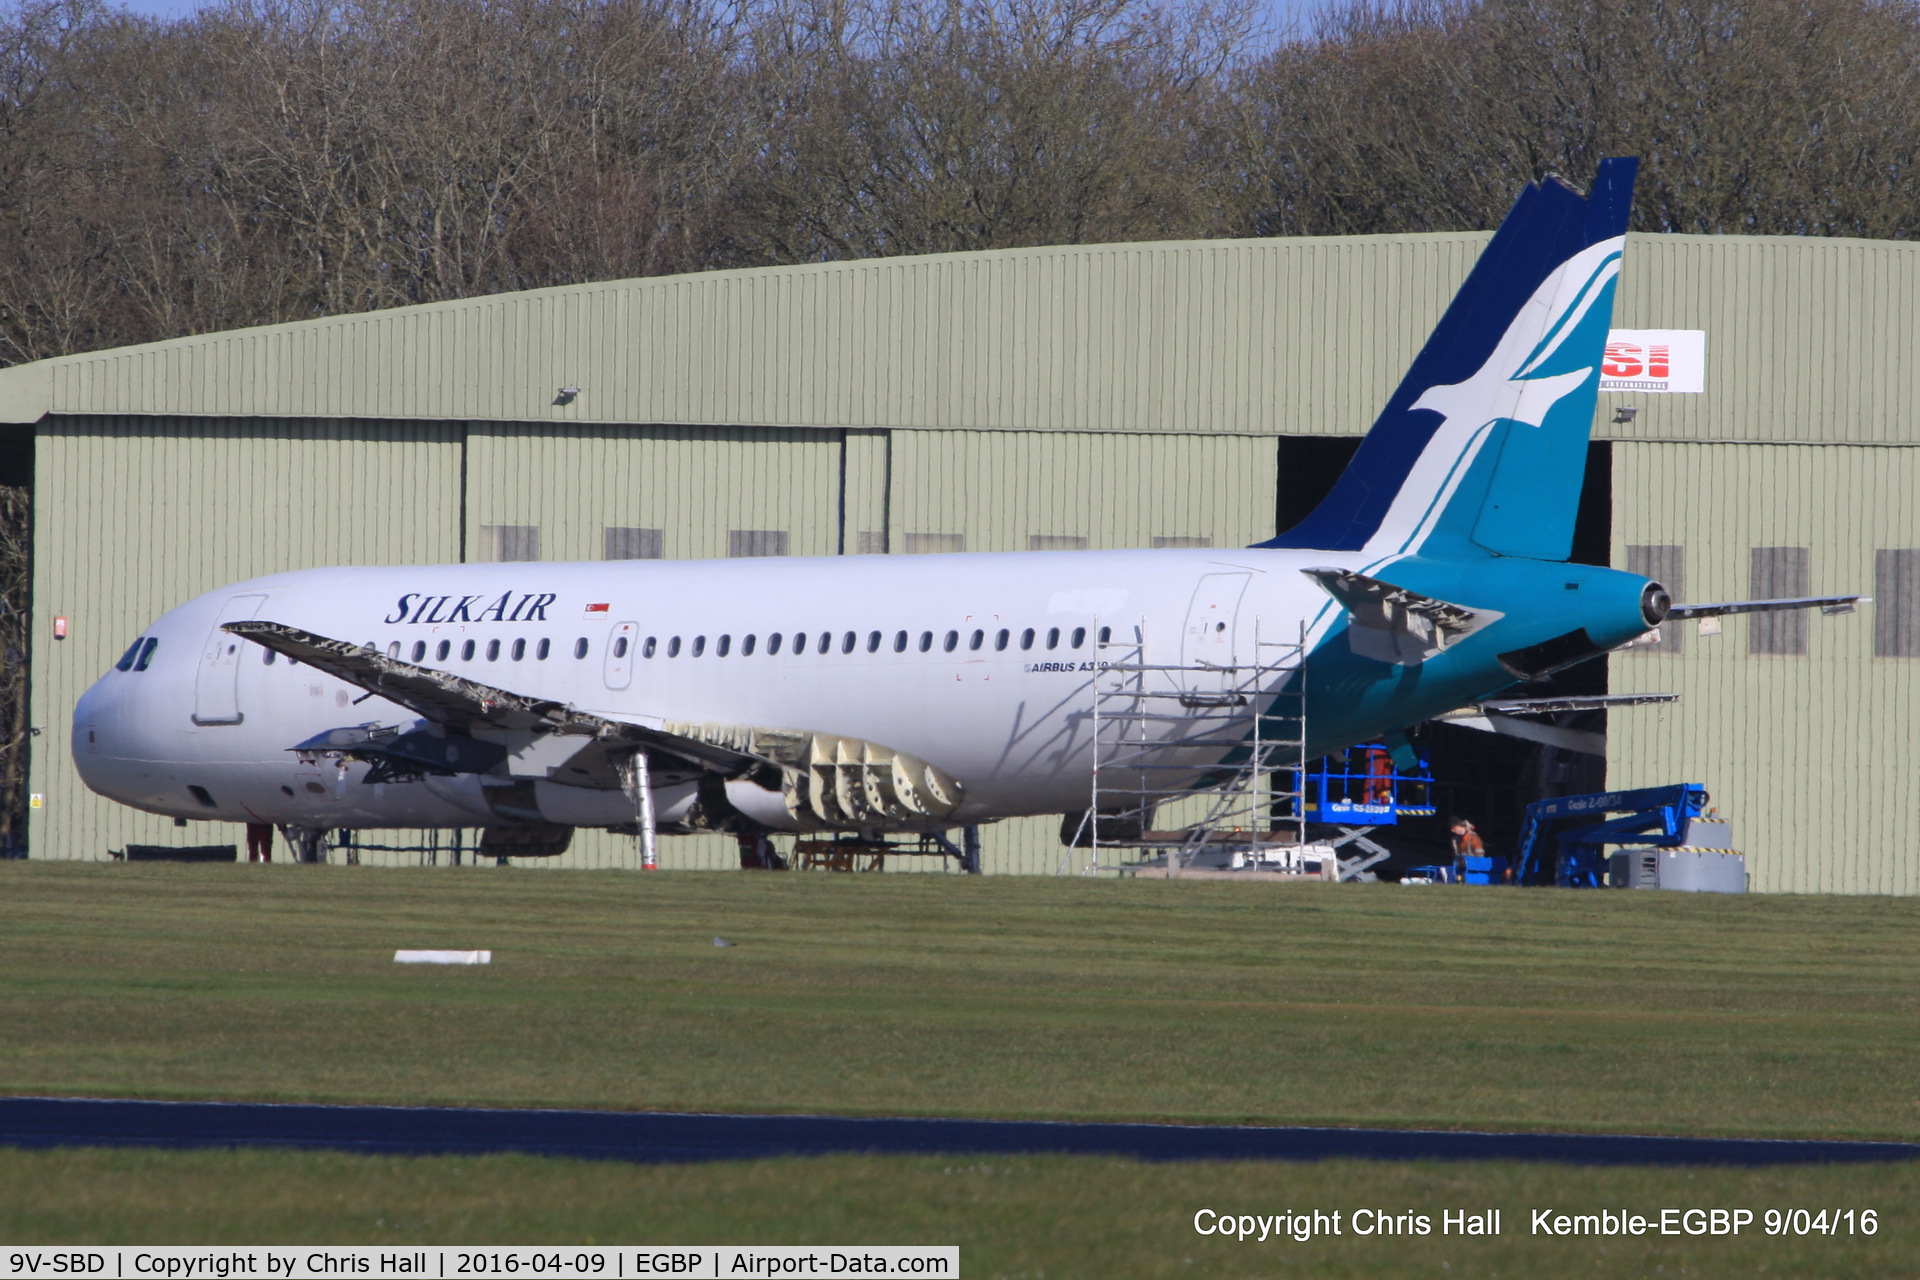 9V-SBD, 2002 Airbus A319-132 C/N 1698, being parted out by ASI at Kemble